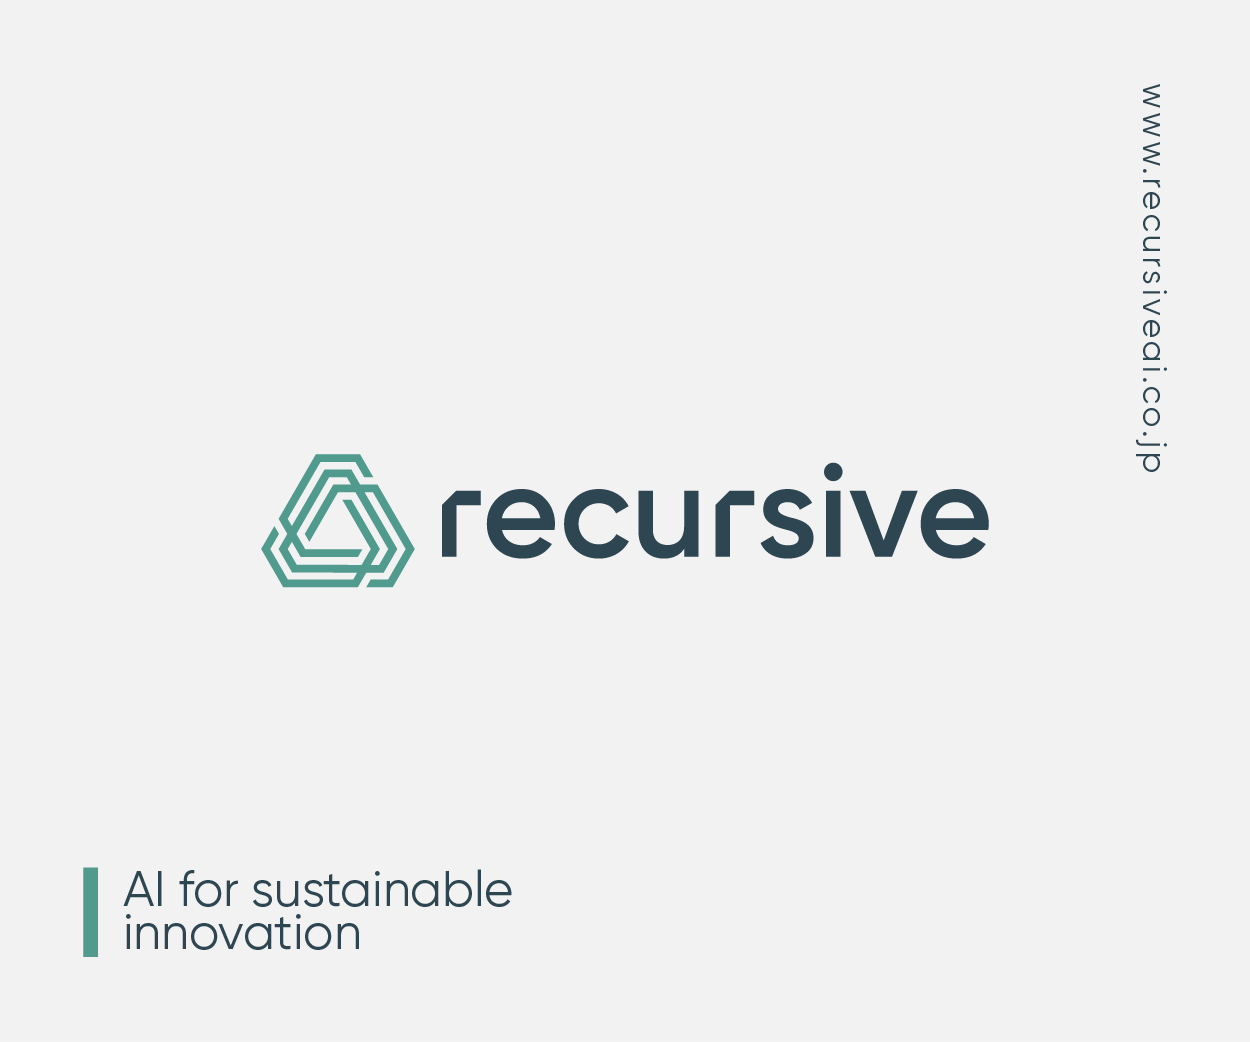 Recursive a consulting company working on developing AI systems with a focus on sustainability Logo Design Image